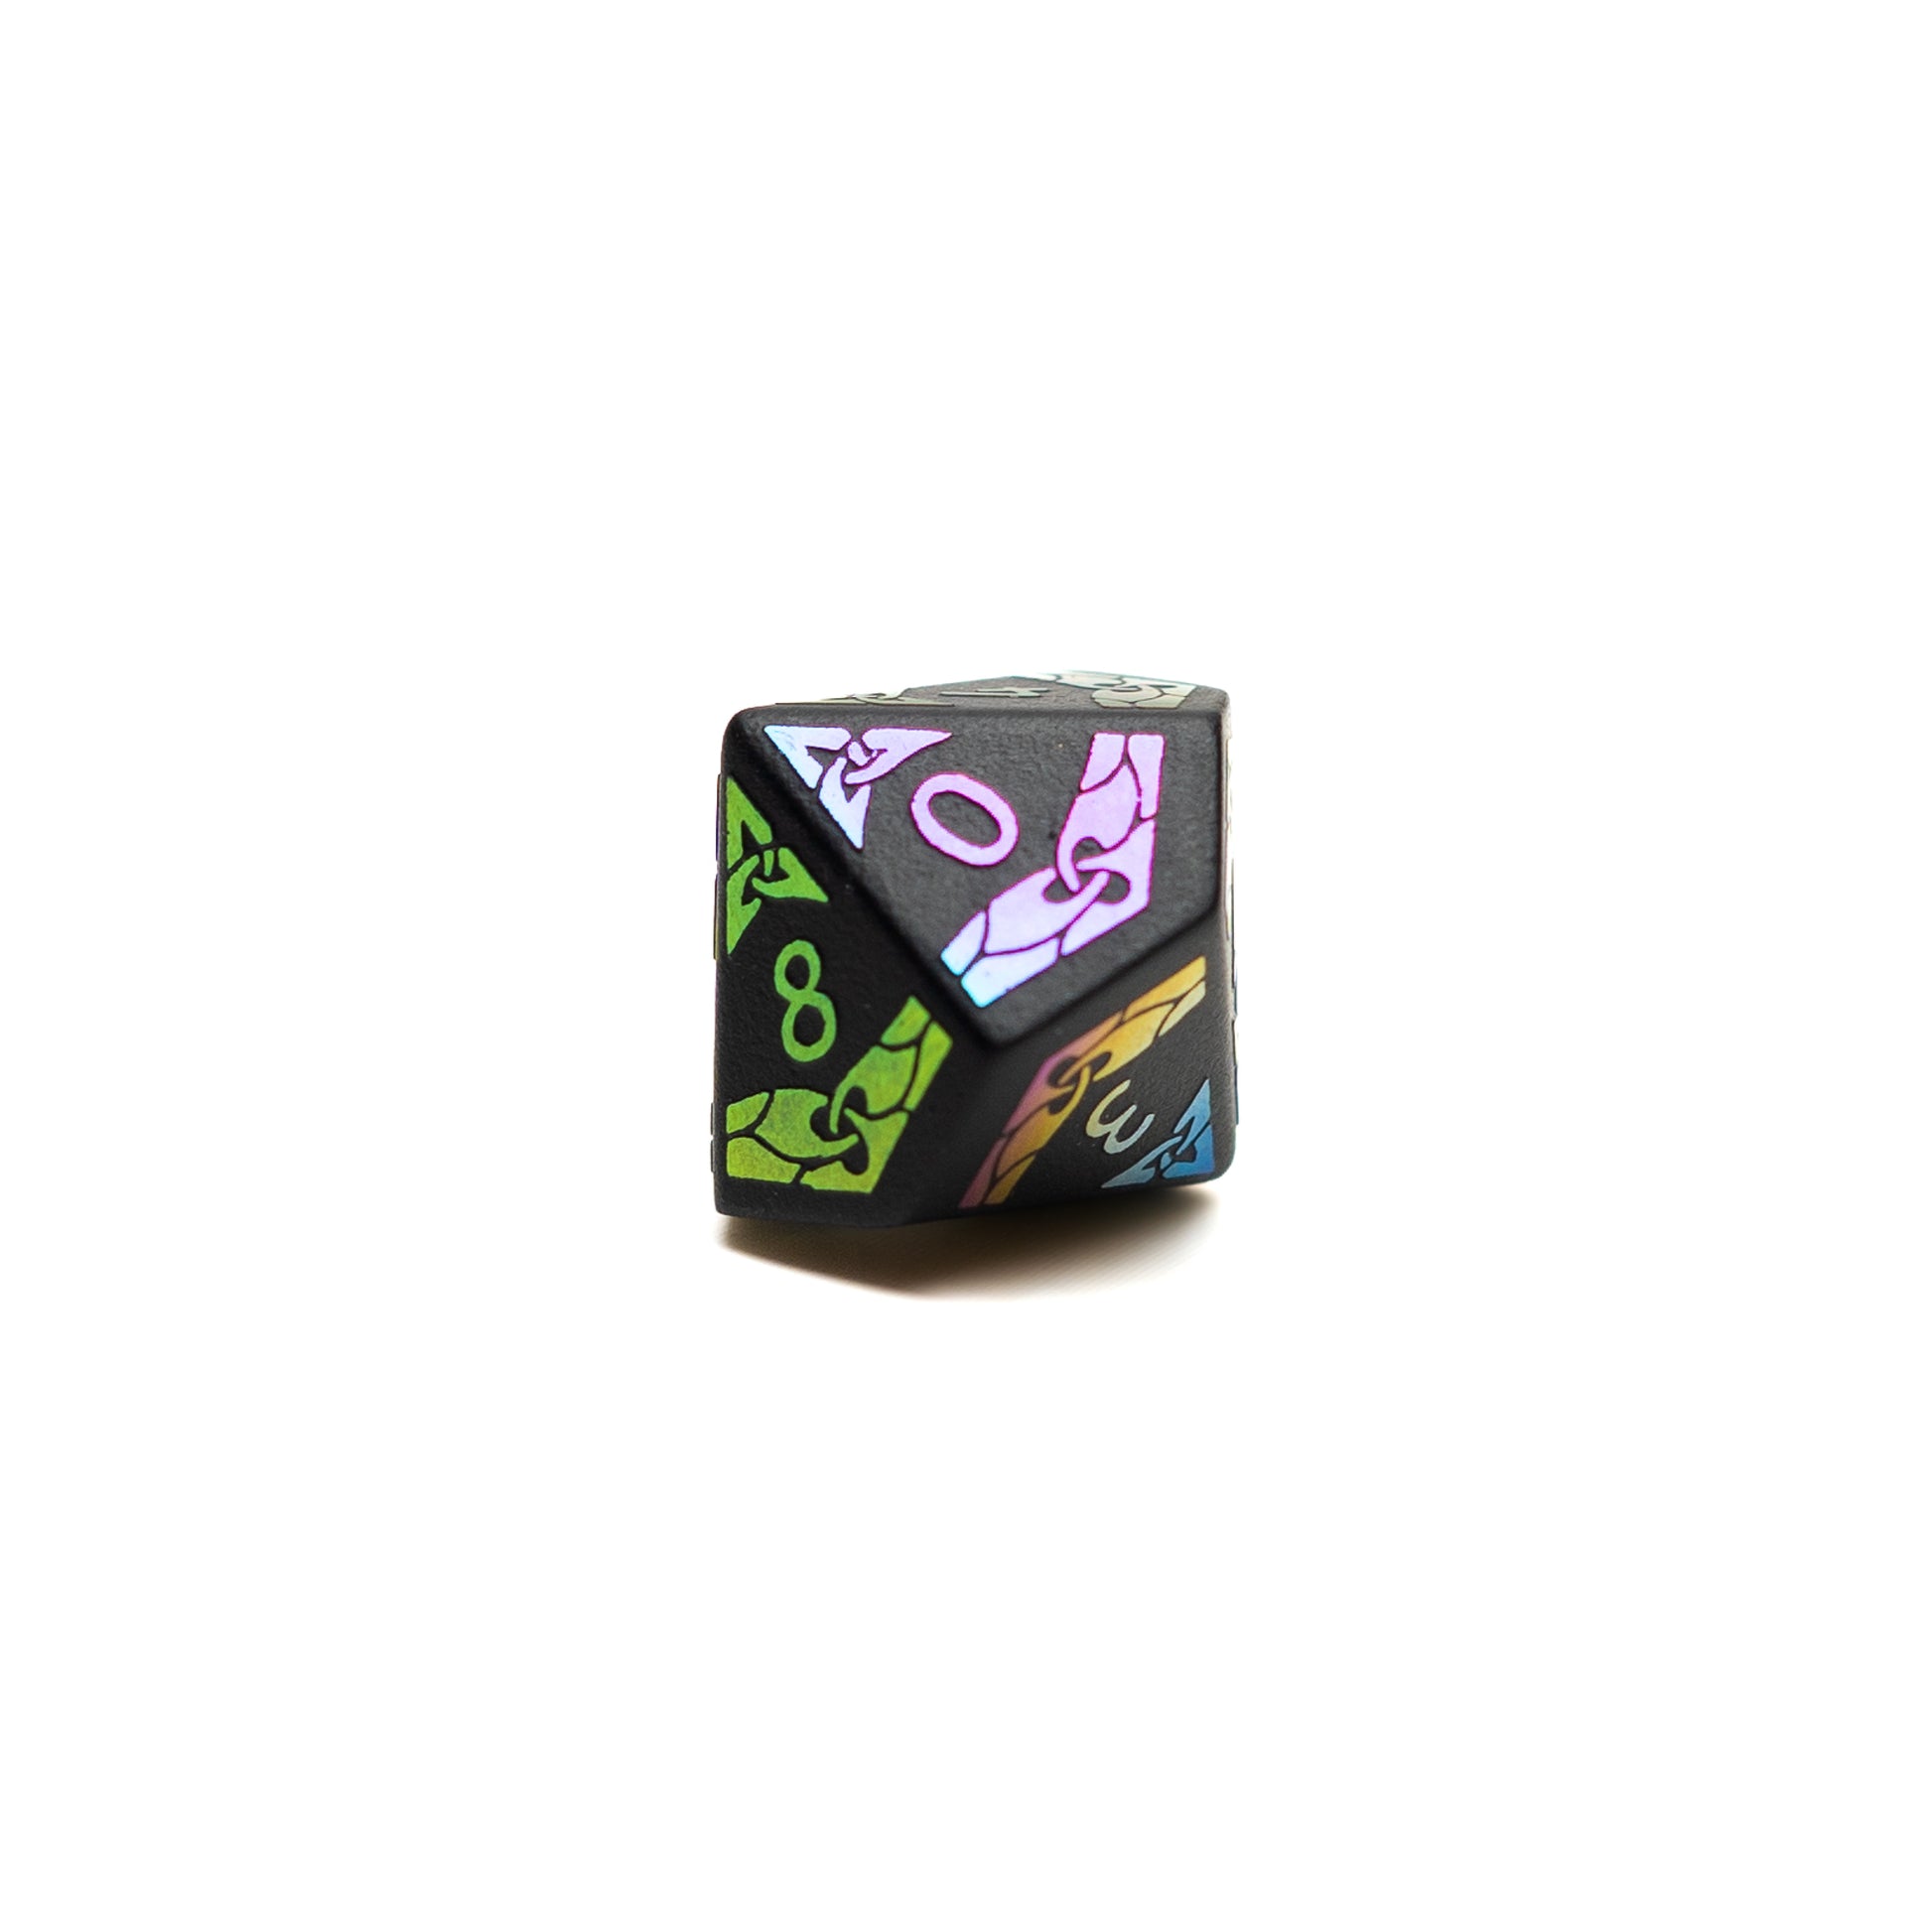 Roll Britannia Sharp Edged Obsidian Gemstone Dungeons and Dragons D10 Dice with Iridescent details